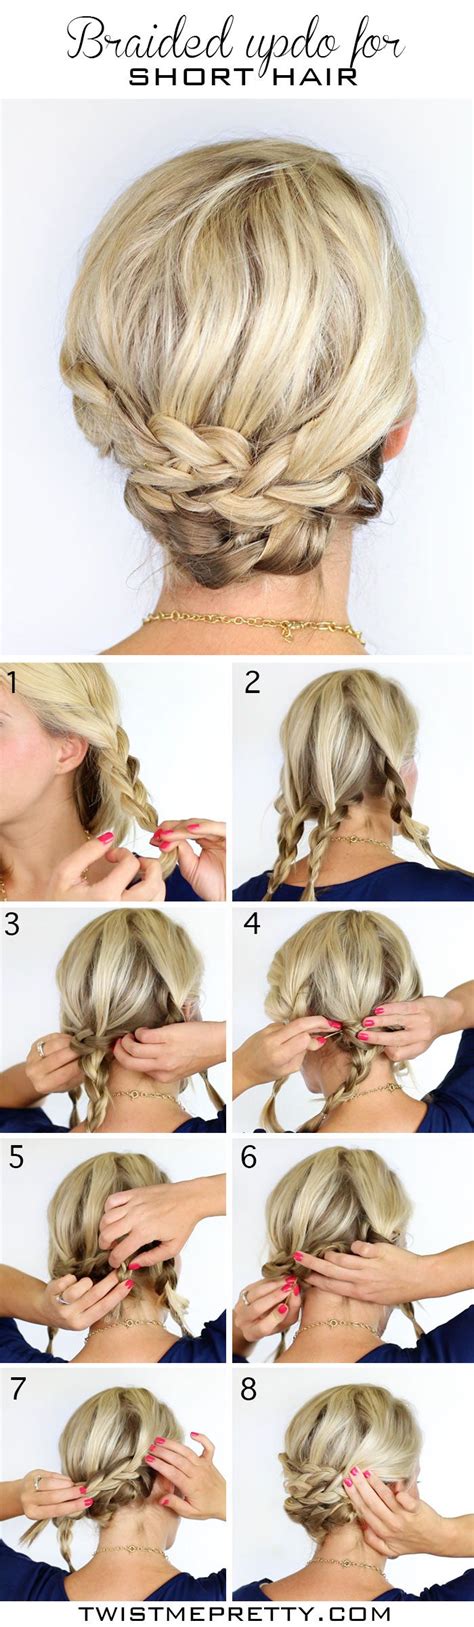 See more ideas about short hair updo, short hair updo easy, short hair styles. 12 Pretty Braided Hairstyles for Short Hair - Pretty Designs